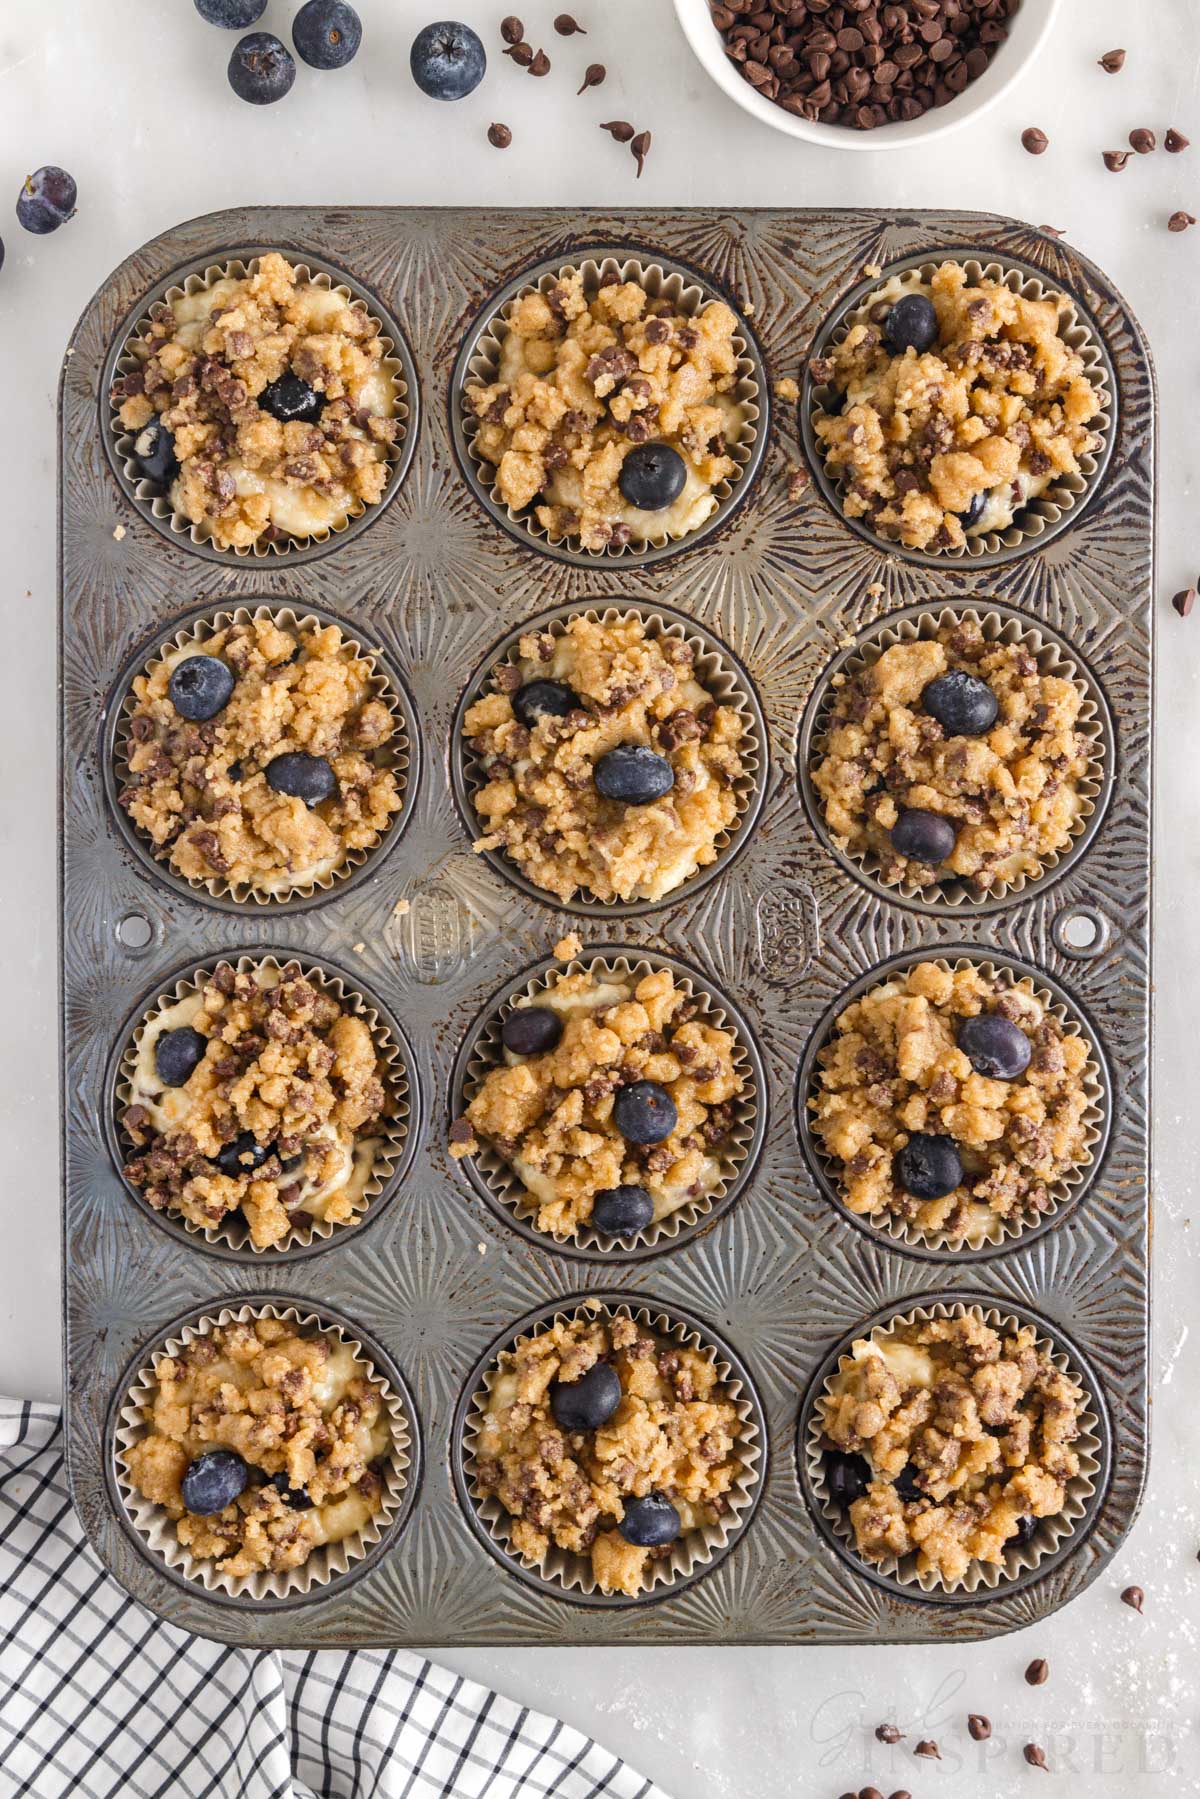 Streusel and blueberries added to the tops of the muffin batter in the muffin tin.